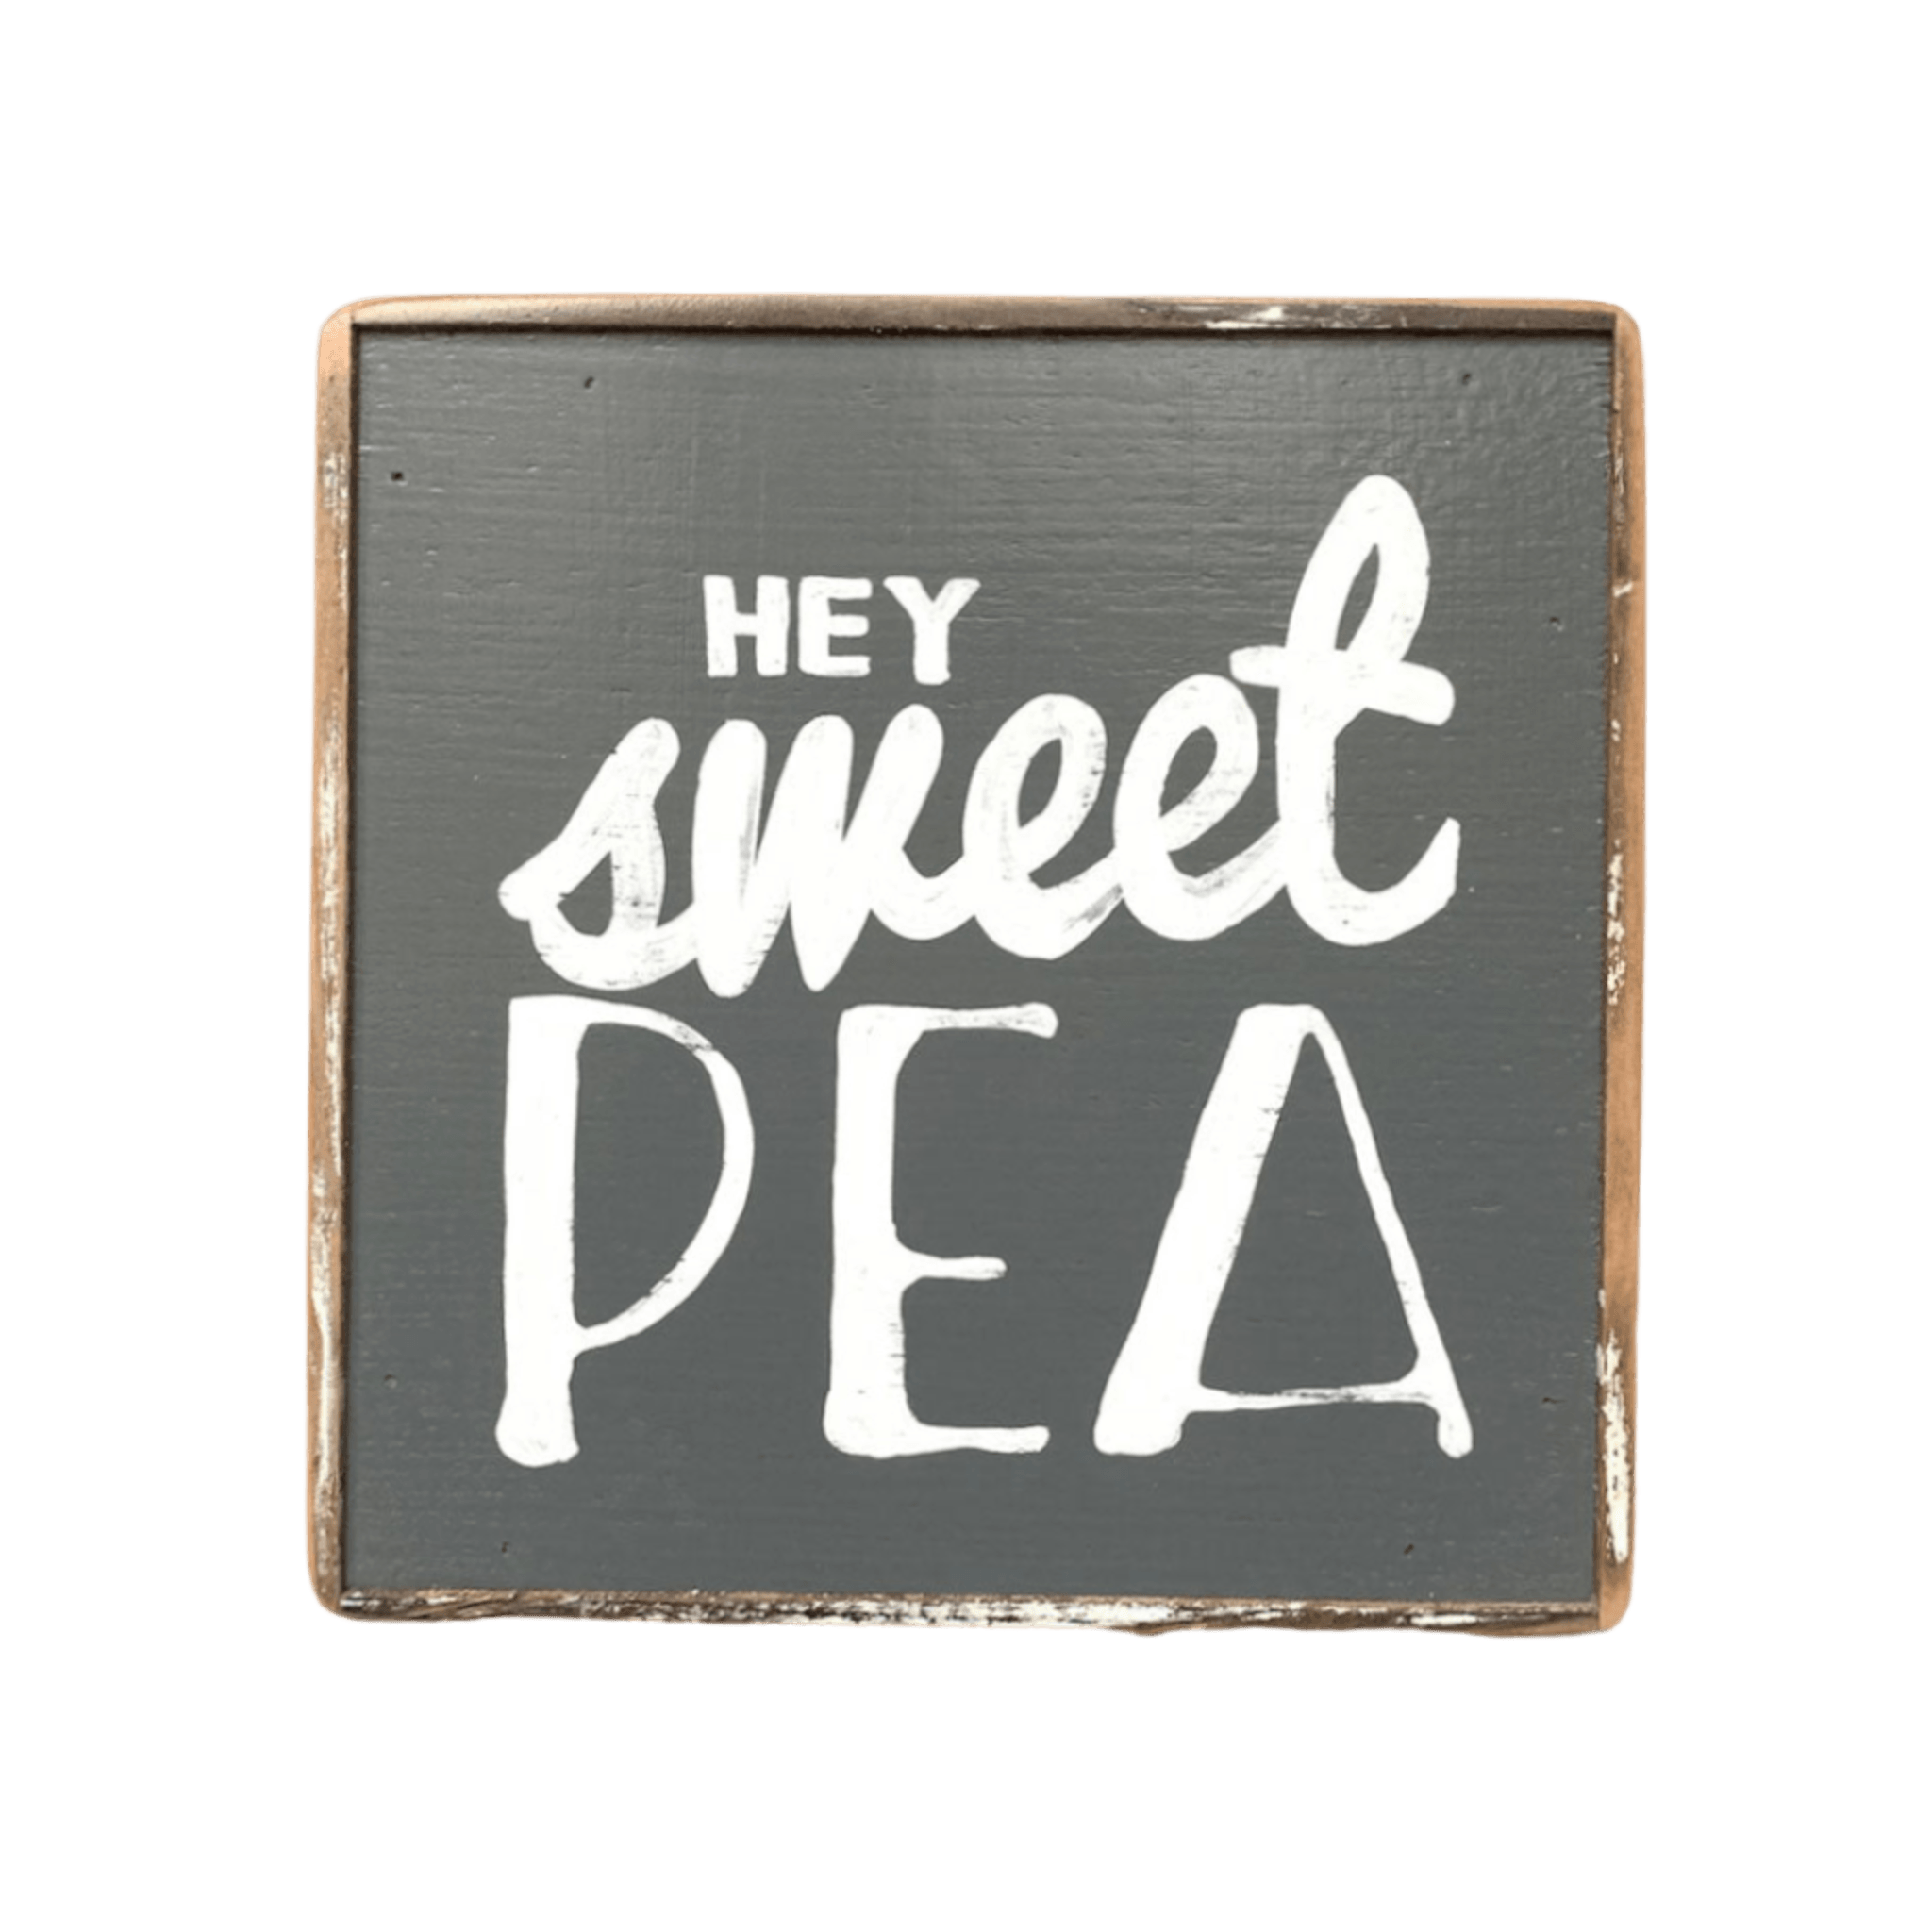 Red Jeggings 0-3M – The Sweet Pea Shop